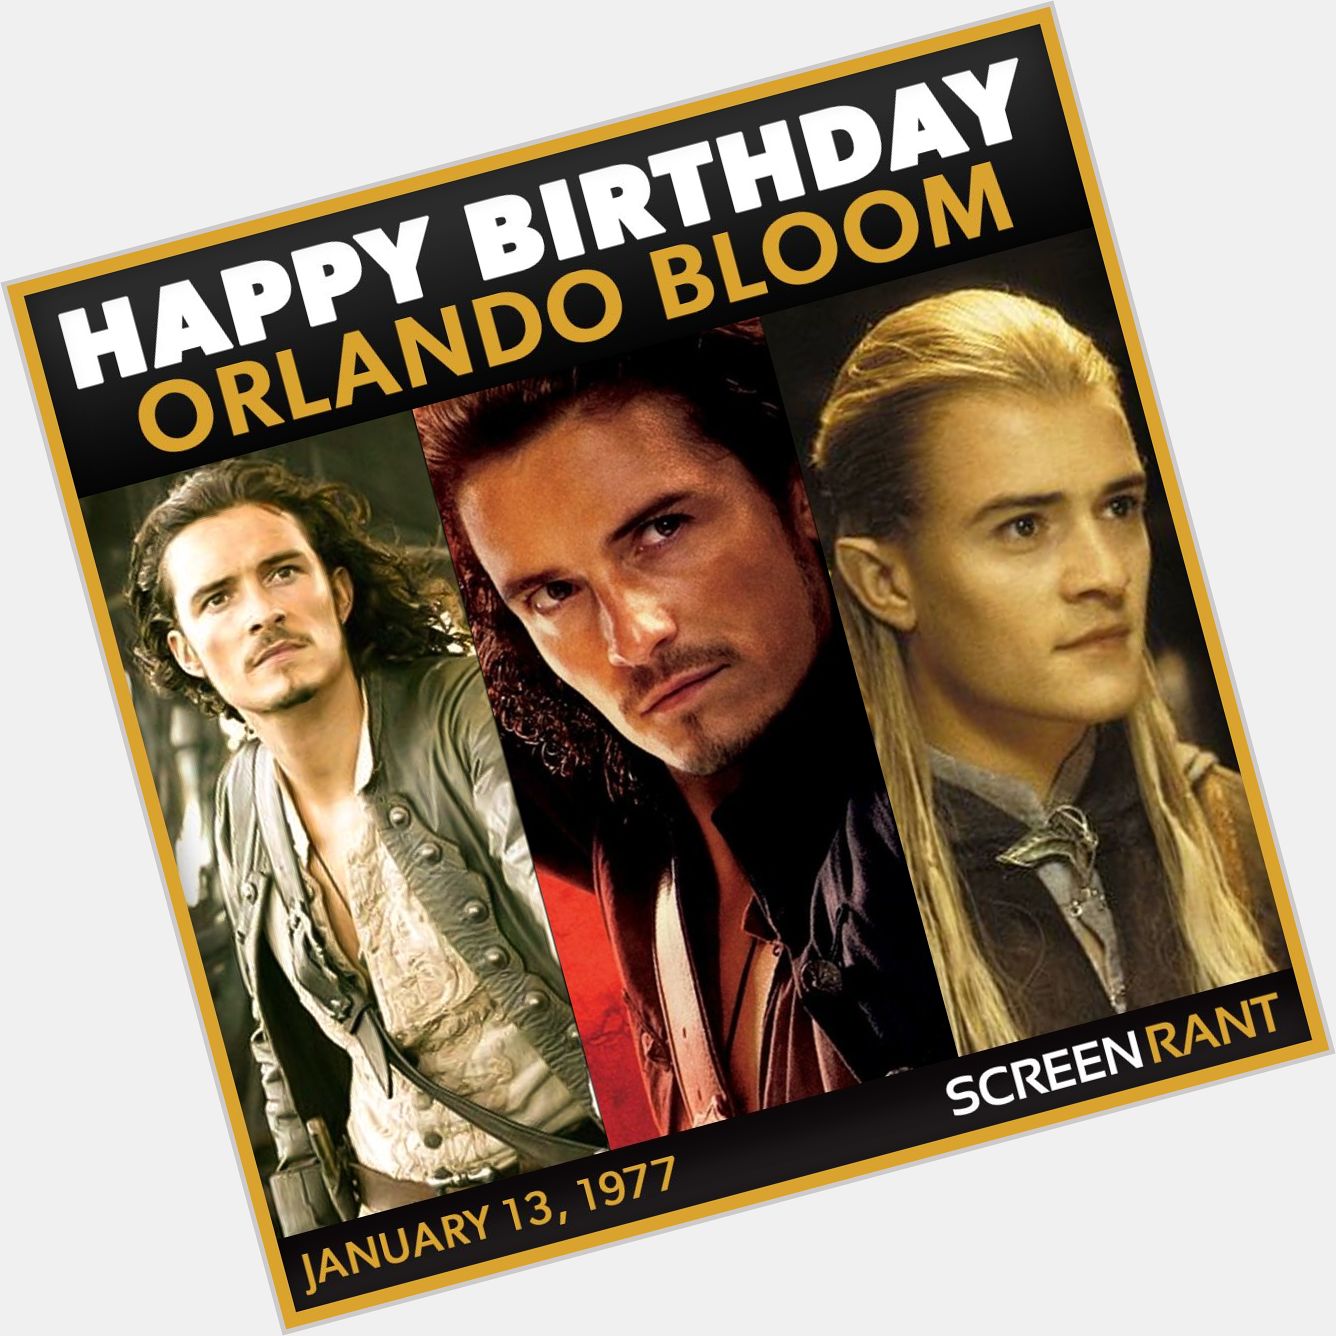 Happy Birthday to the one and only Orlando Bloom! Share some of your favorite roles with us. 